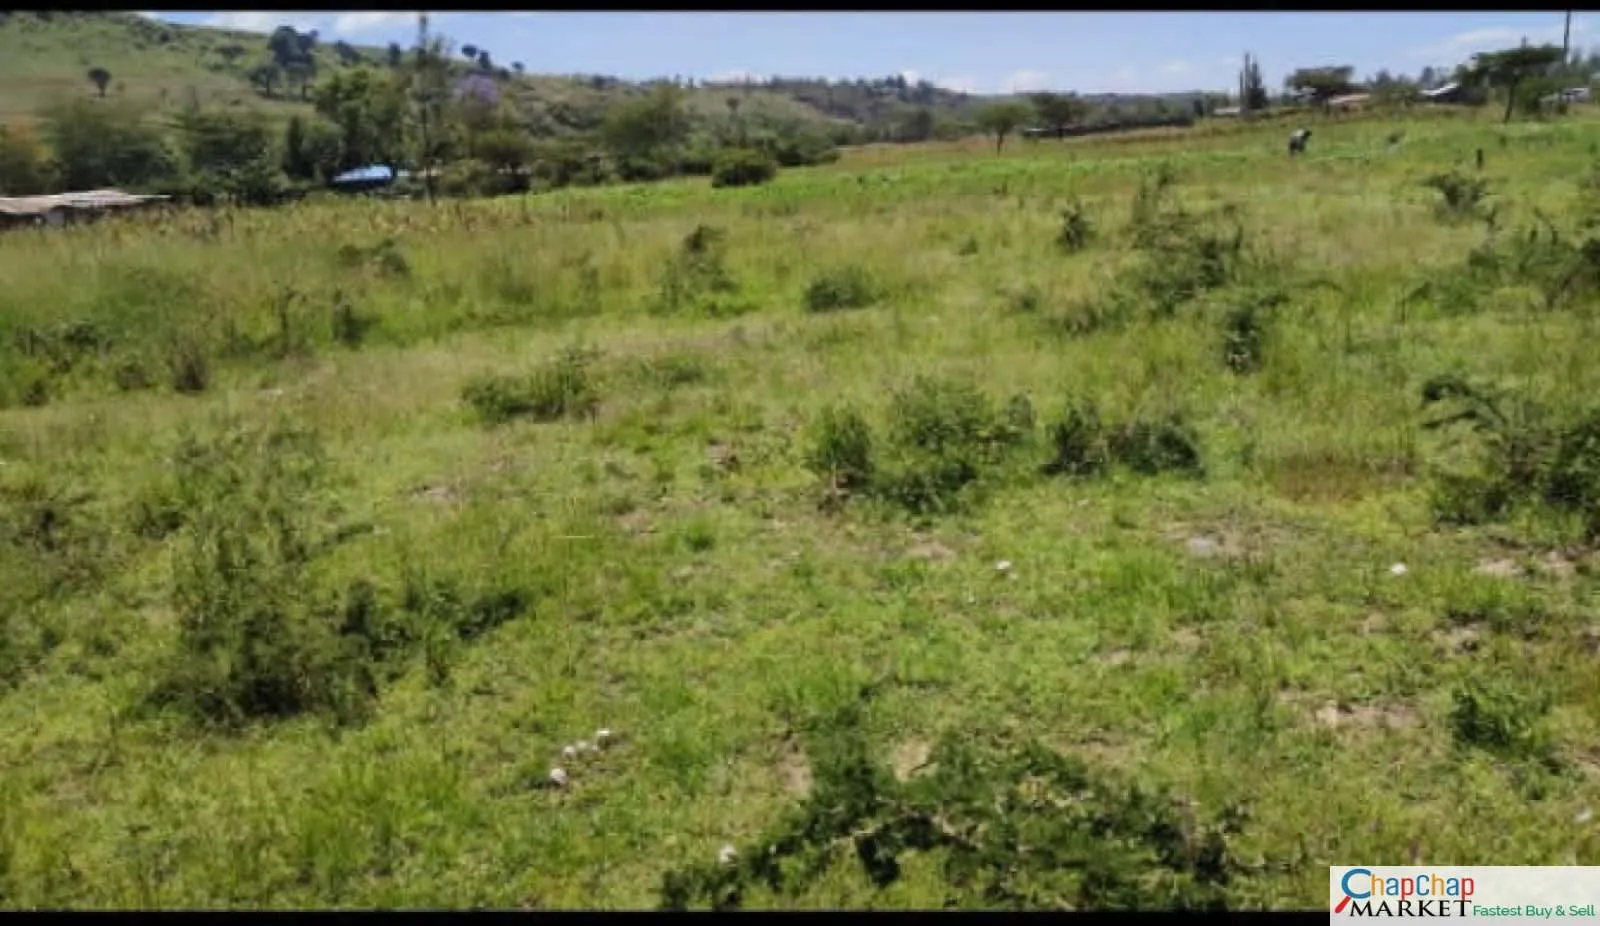 Distress Sale 50 by 100 Land for Sale Nairobi-Nakuru highway Laikipia university (Roots academy) Clean Title Deed CHEAPEST!